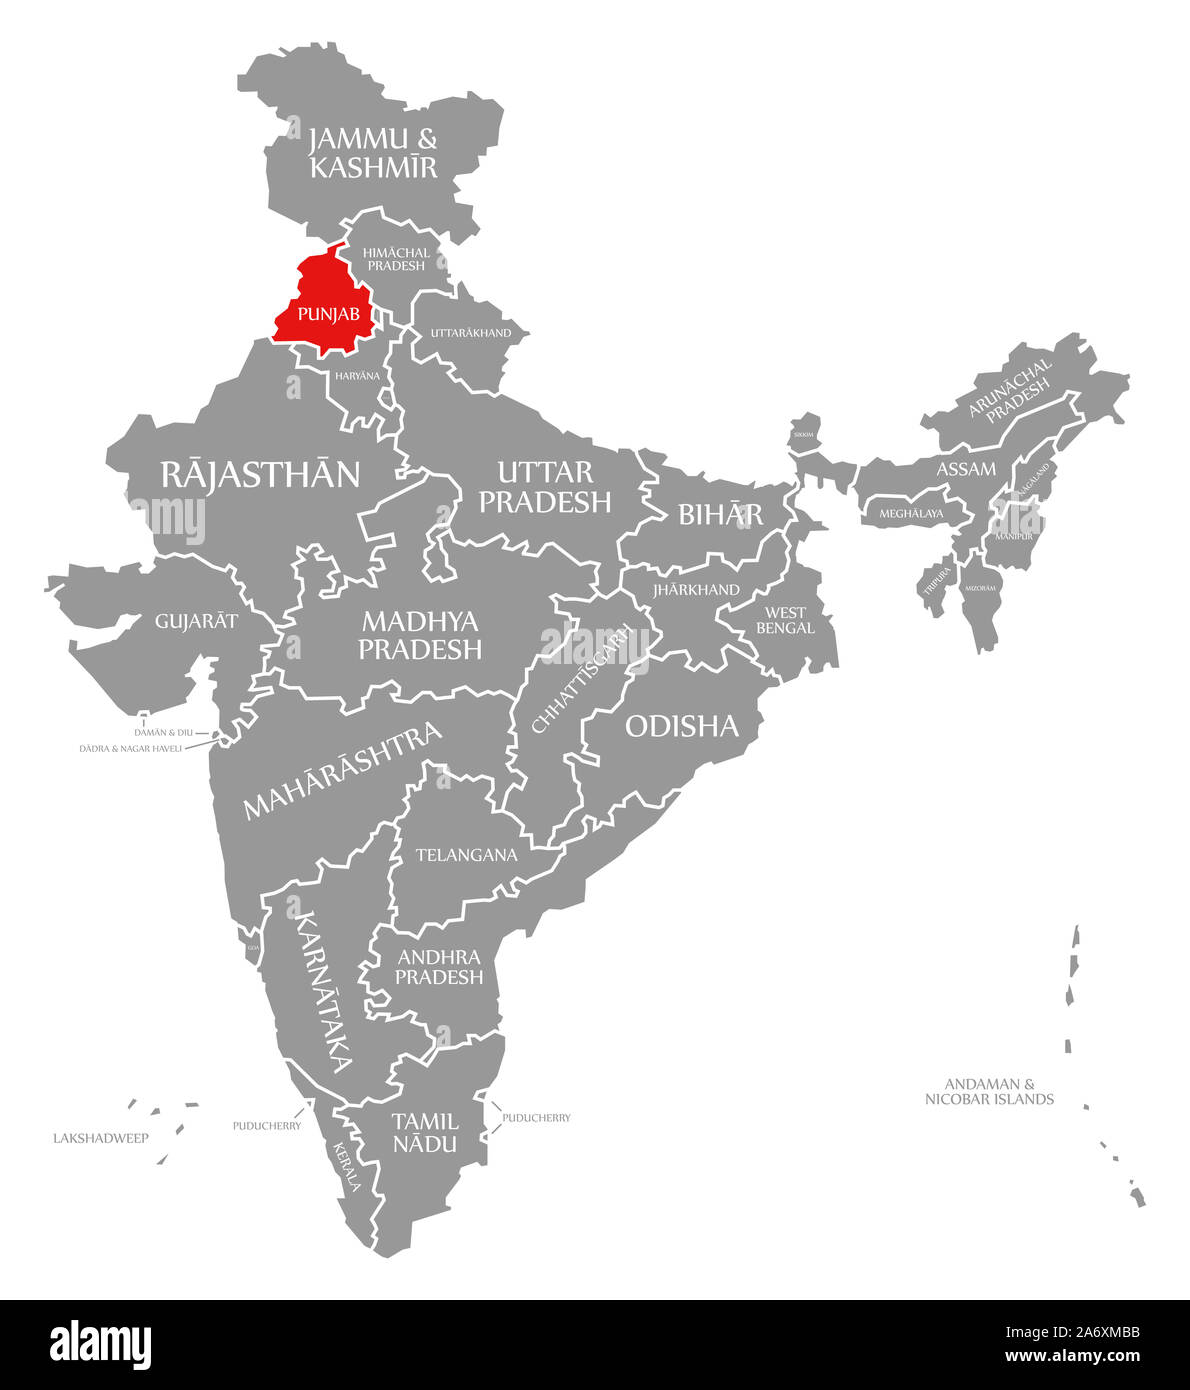 Punjab red highlighted in map of India Stock Photo